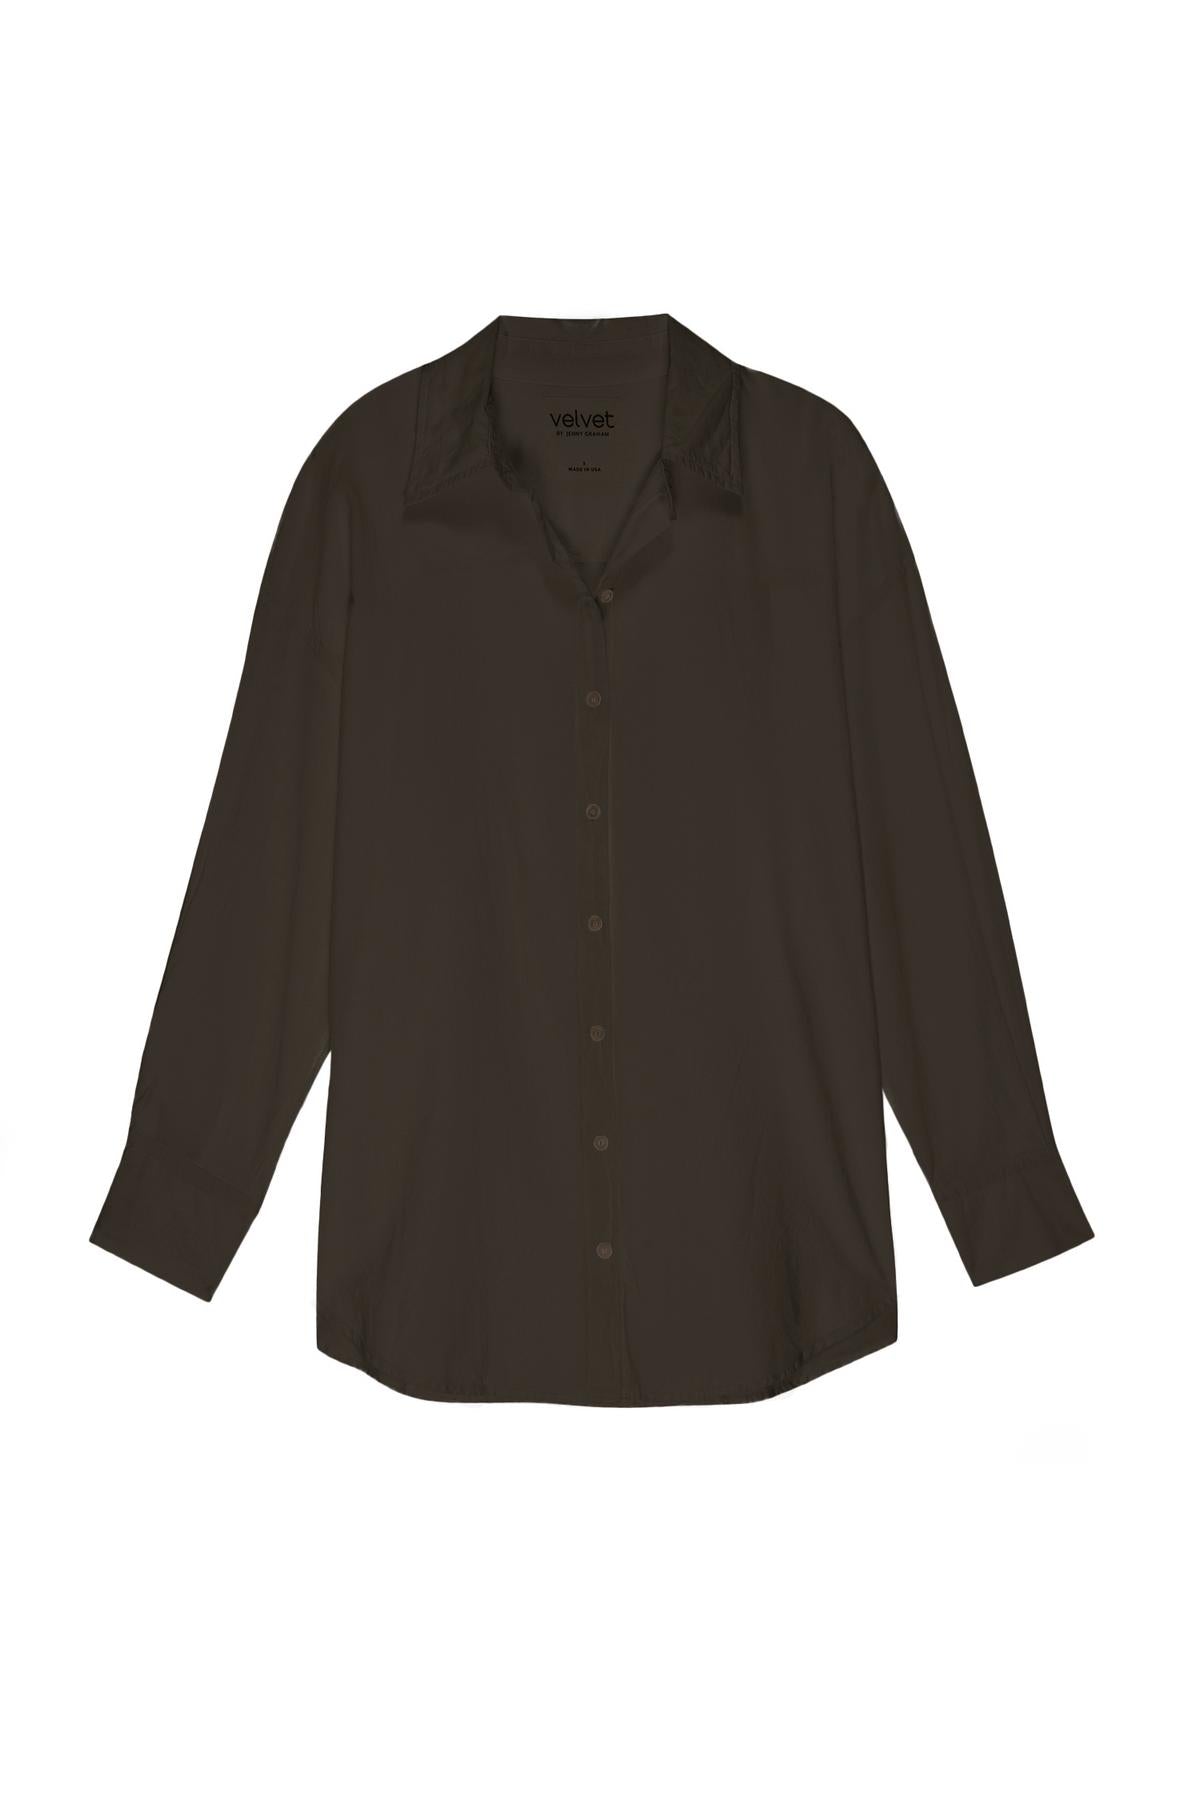   A soft cotton shirting women's oversized brown Velvet by Jenny Graham REDONDO BUTTON-UP SHIRT with a borrowed-from-the-boys silhouette. 